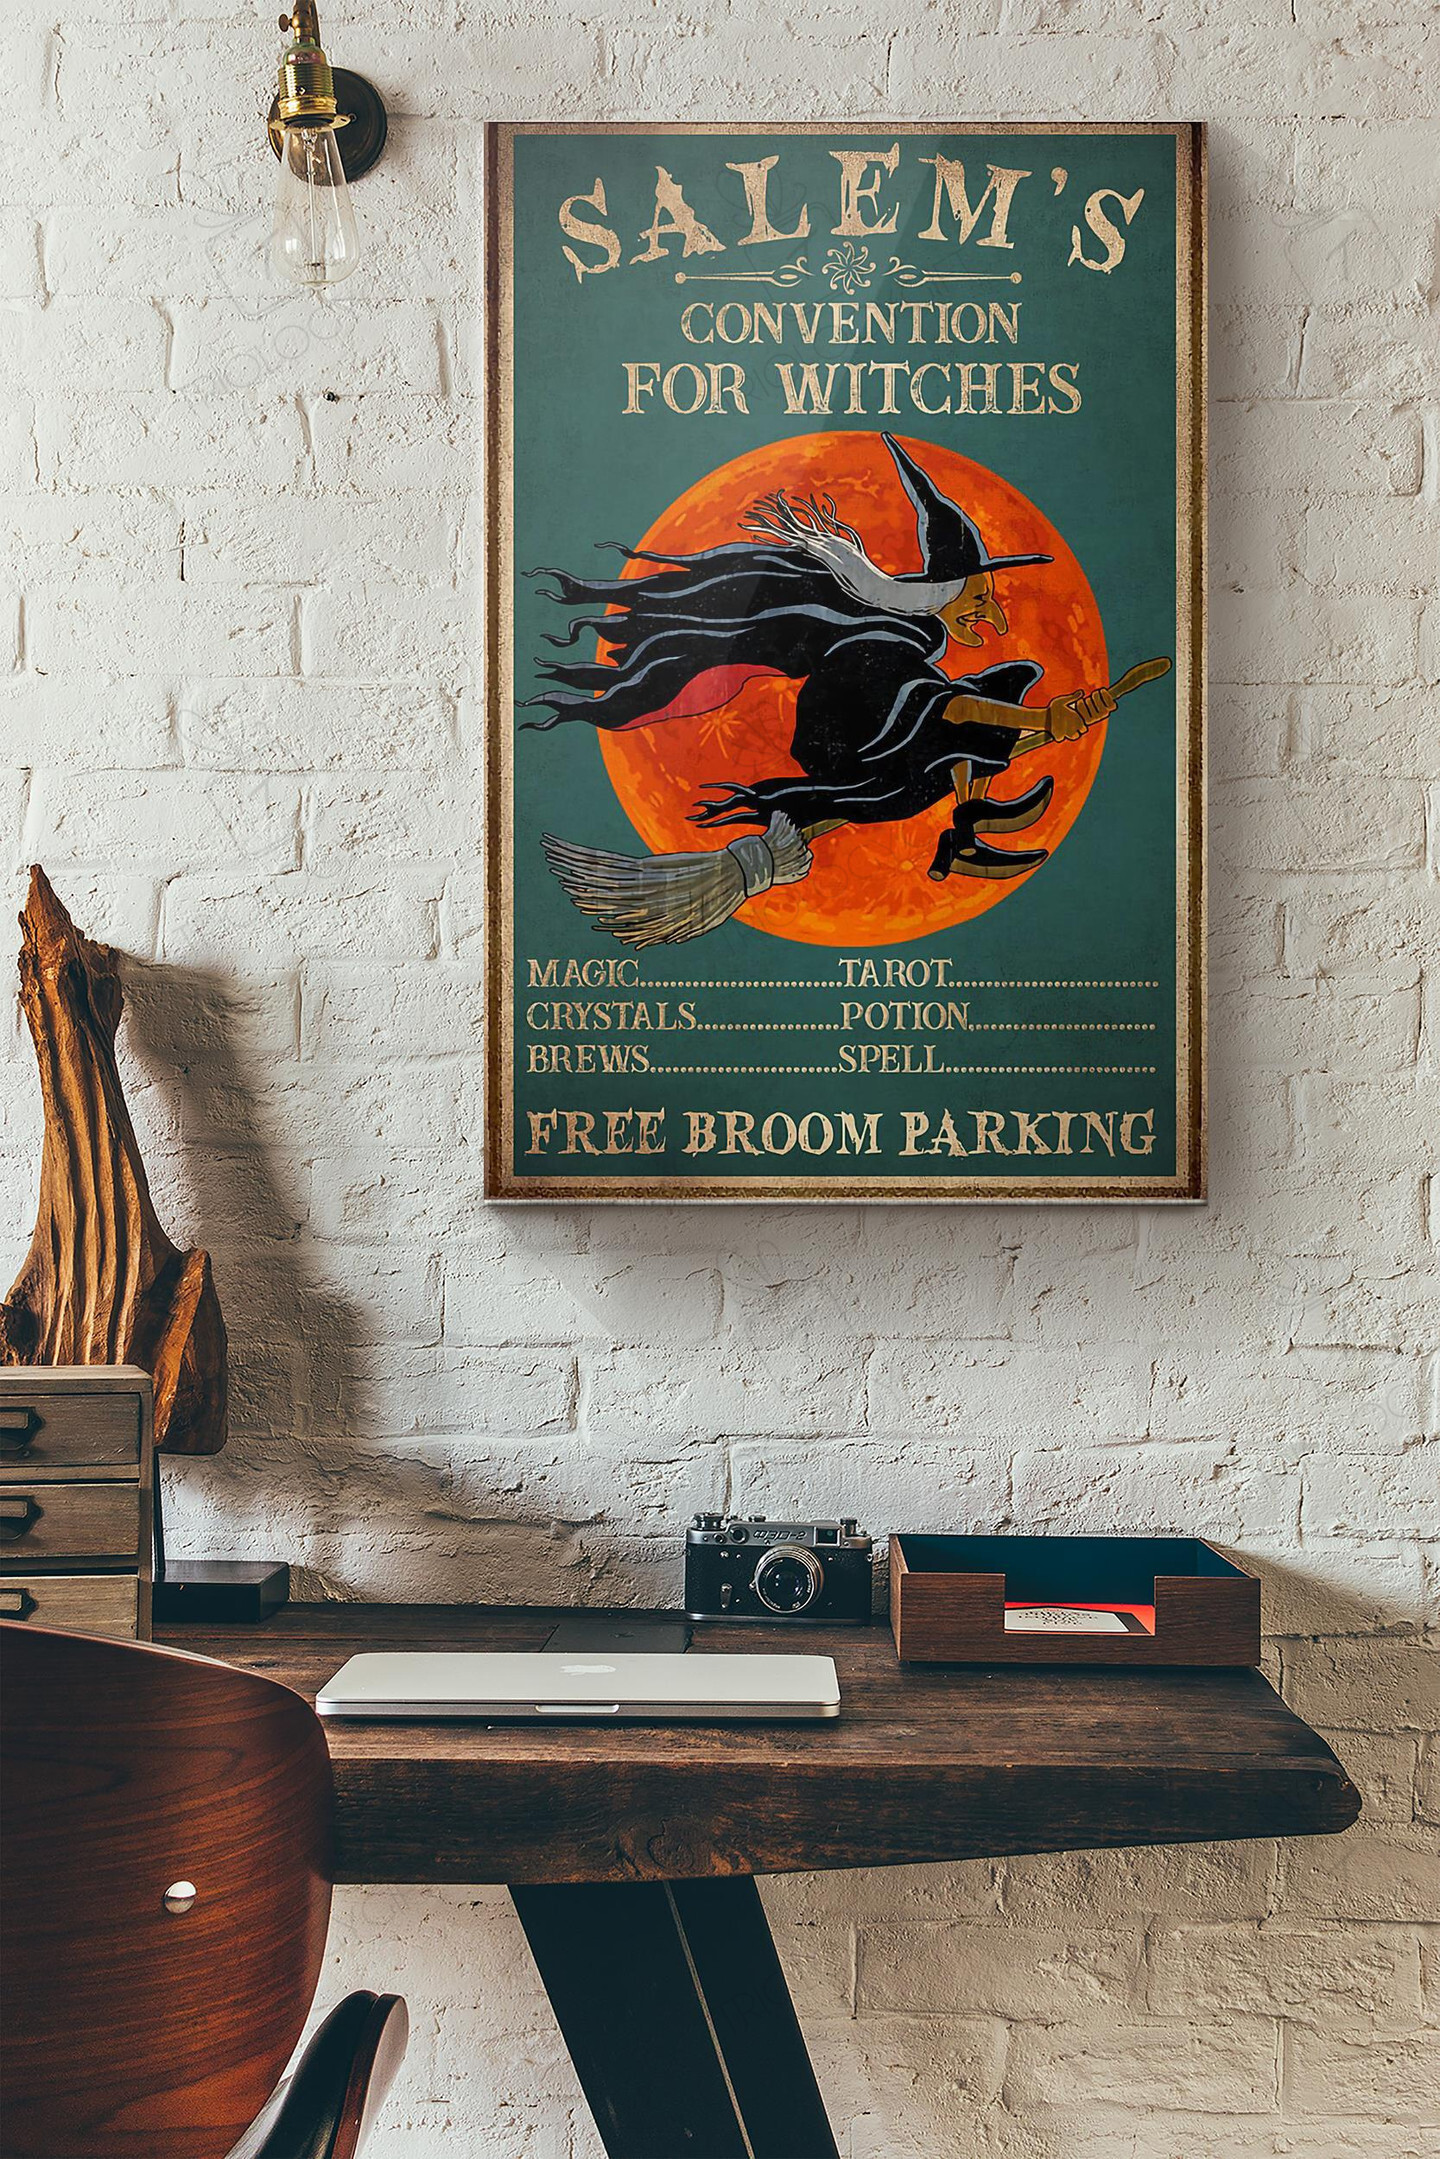 Witch Salems Convention For Witches Free Broom Parking Canvas Painting Ideas, Canvas Hanging Prints, Gift Idea Framed Prints, Canvas Paintings Wrapped Canvas 8x10